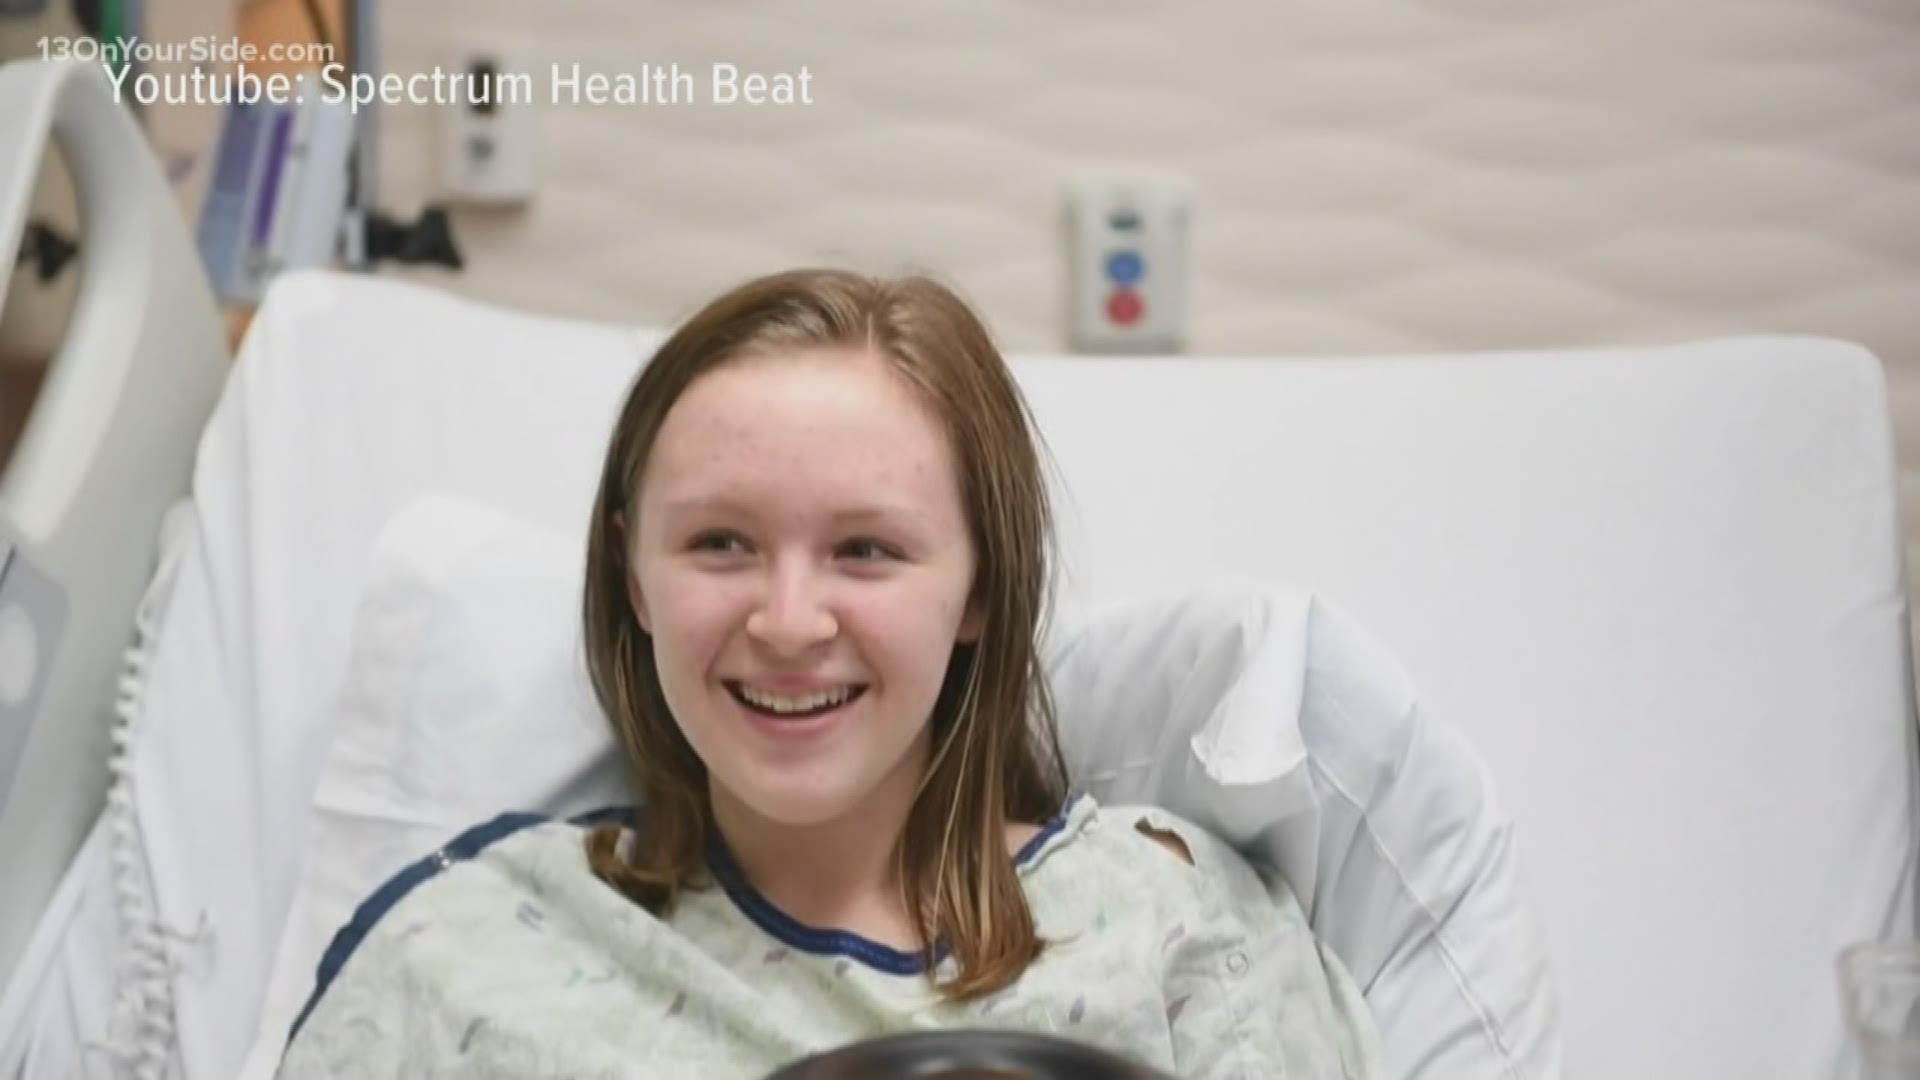 The teen was rushed to Helen DeVos Children's Hospital after she suffered a stroke at school.